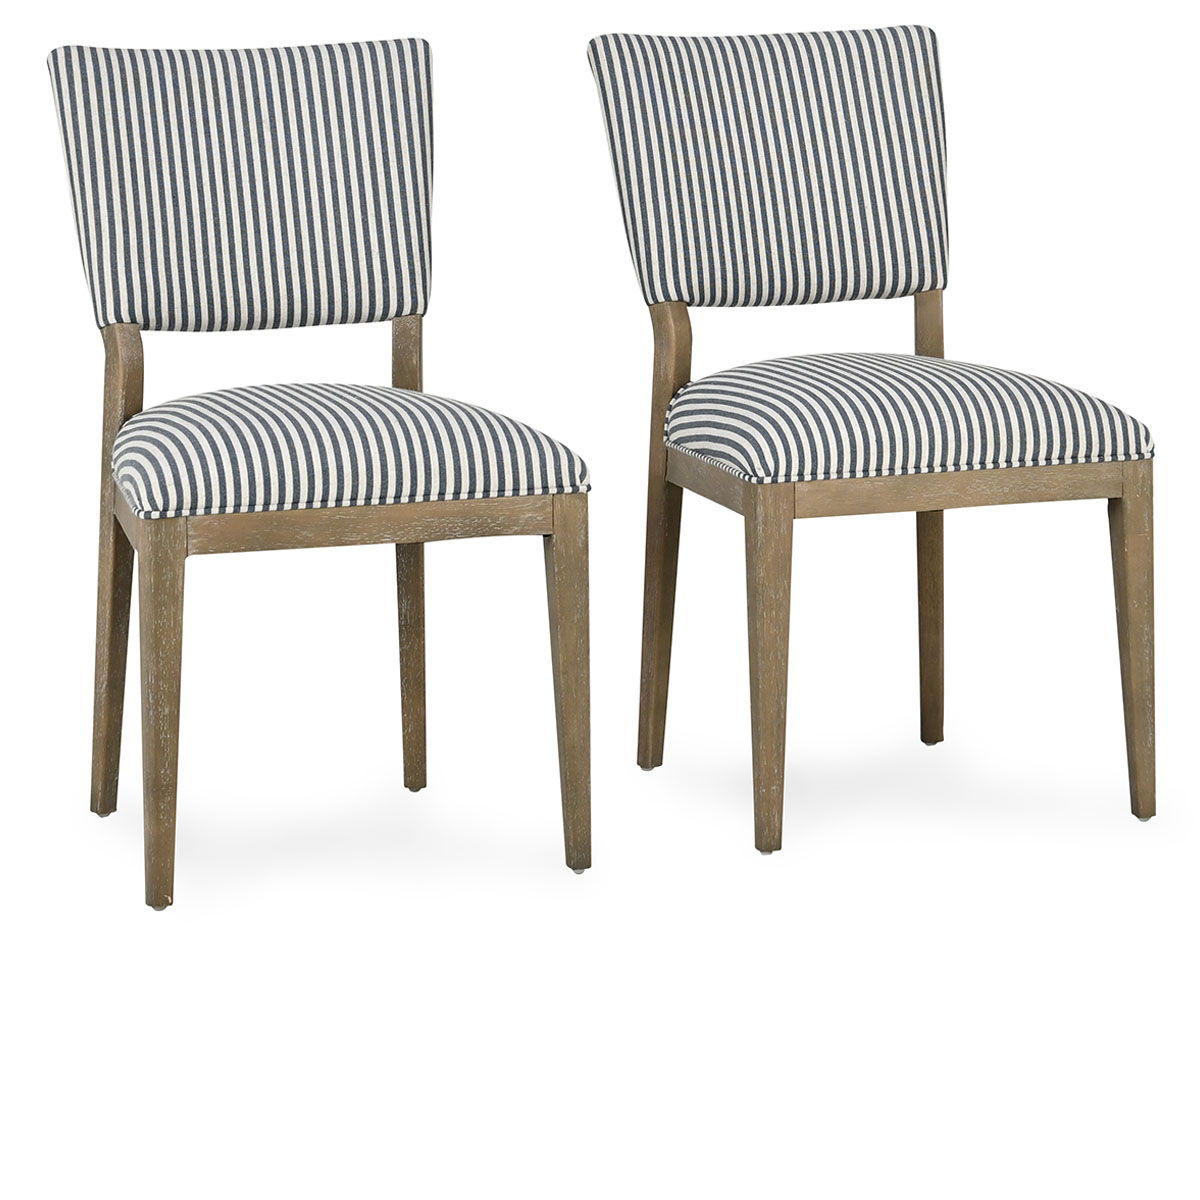 Phillip - Upholstered Dining Chair (Set of 2)